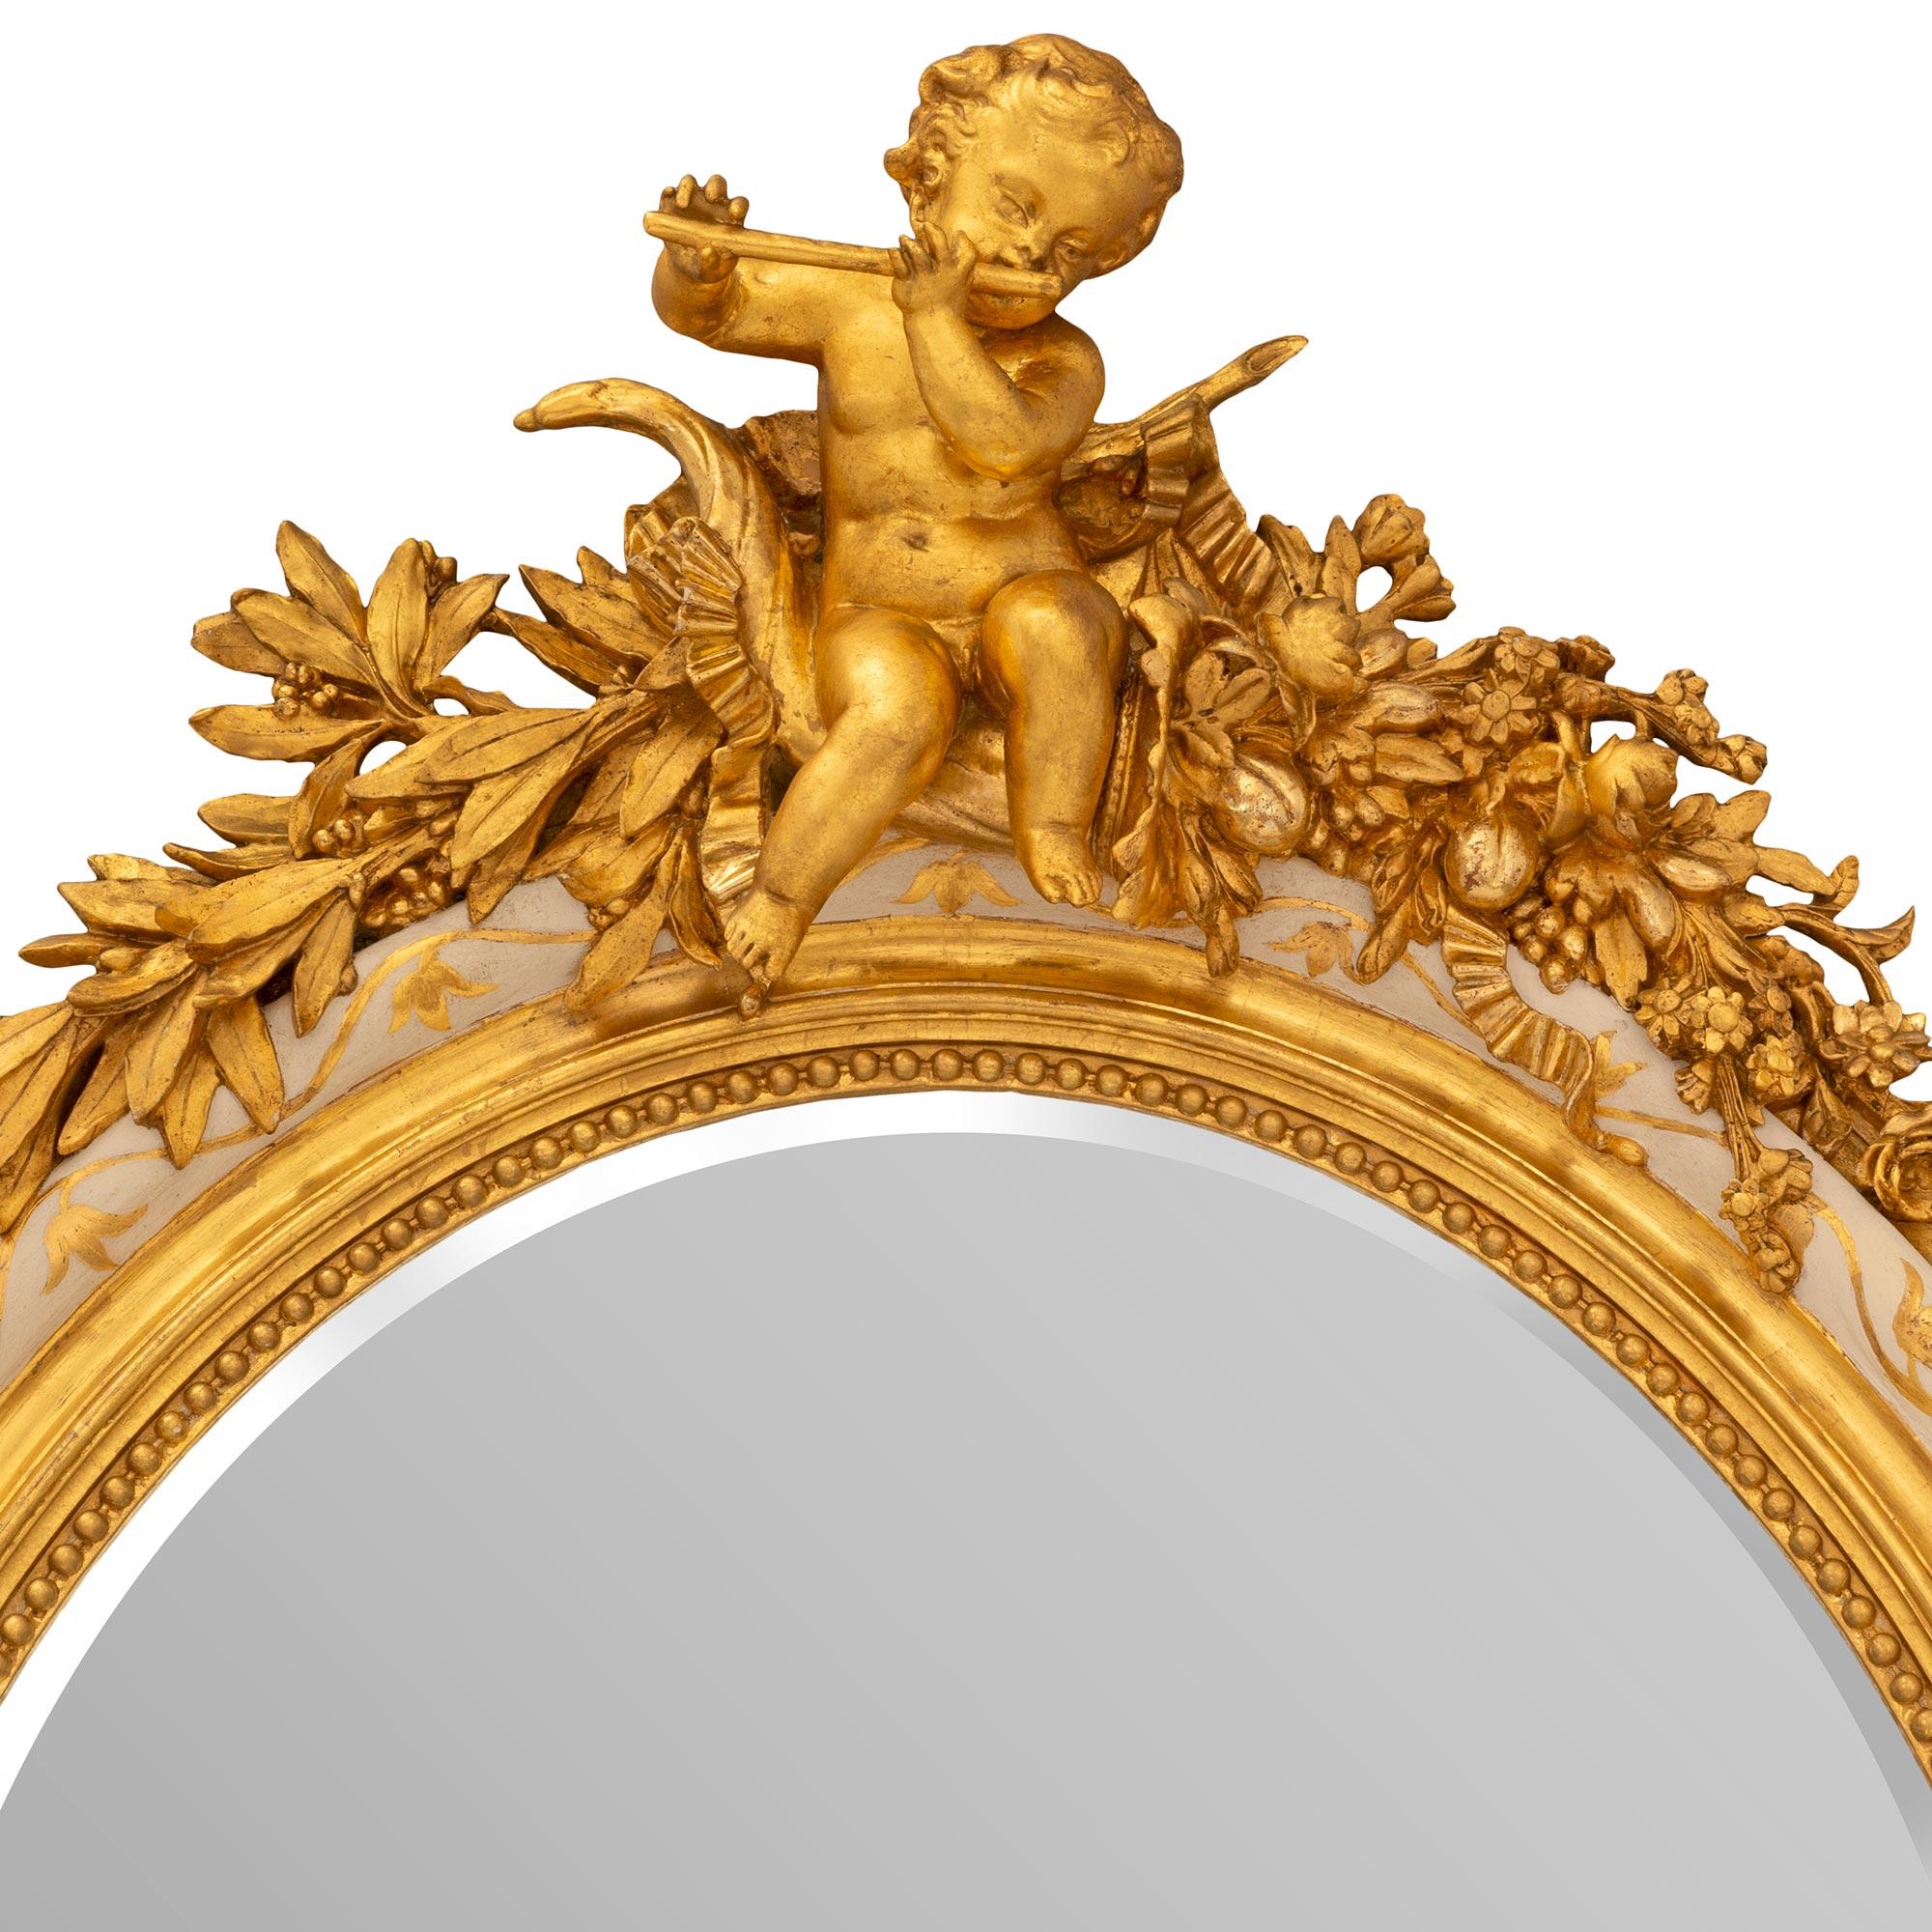 A striking French 19th century Louis XVI st. patinated and giltwood mirror. The oval mirror retains its original mirror plate set within a beautiful wrap around beaded and mottled band with most decorative giltwood scrolled foliate designs extending